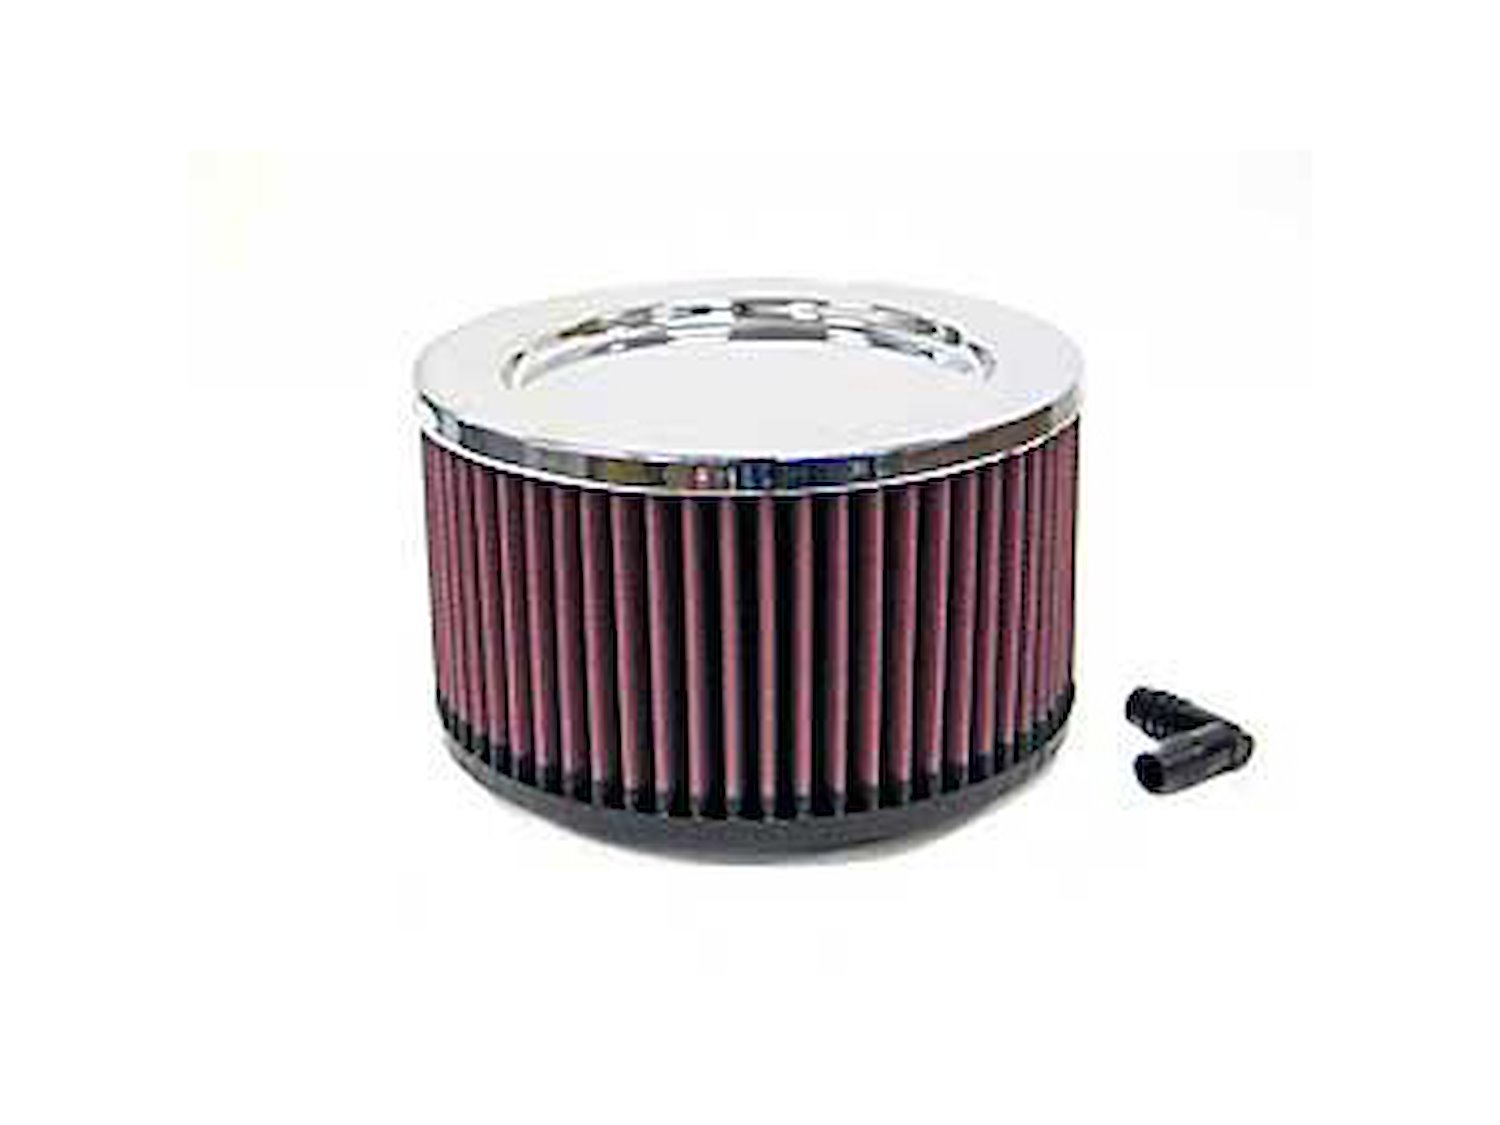 Round Straight Air Filter Flange Dia. (F): 3.063" (78 mm)